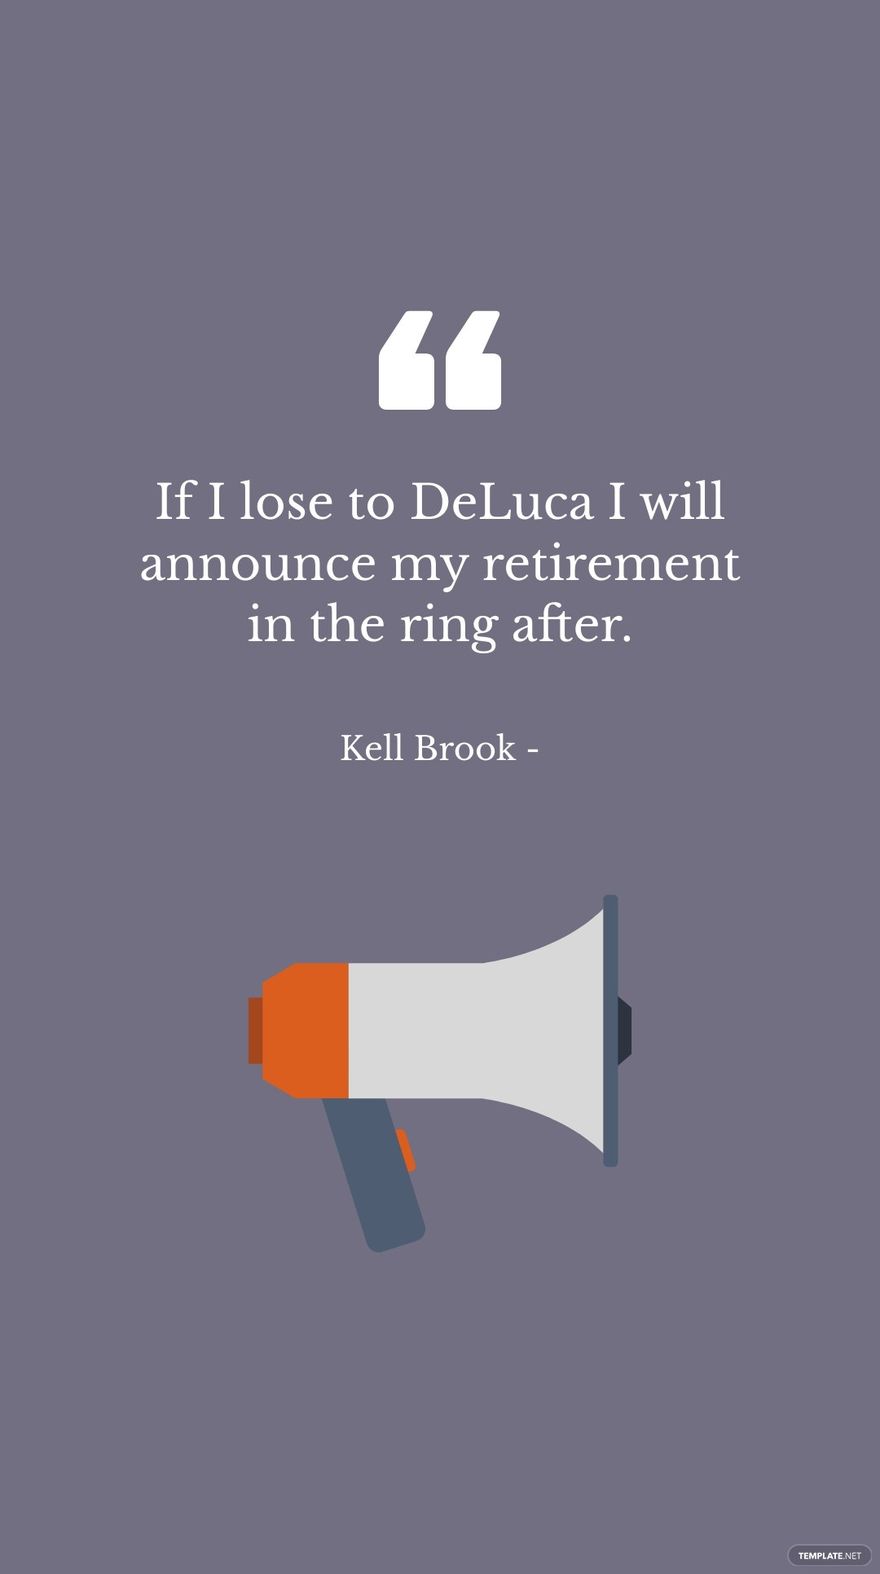 Free Kell Brook - If I lose to DeLuca I will announce my retirement in the ring after.